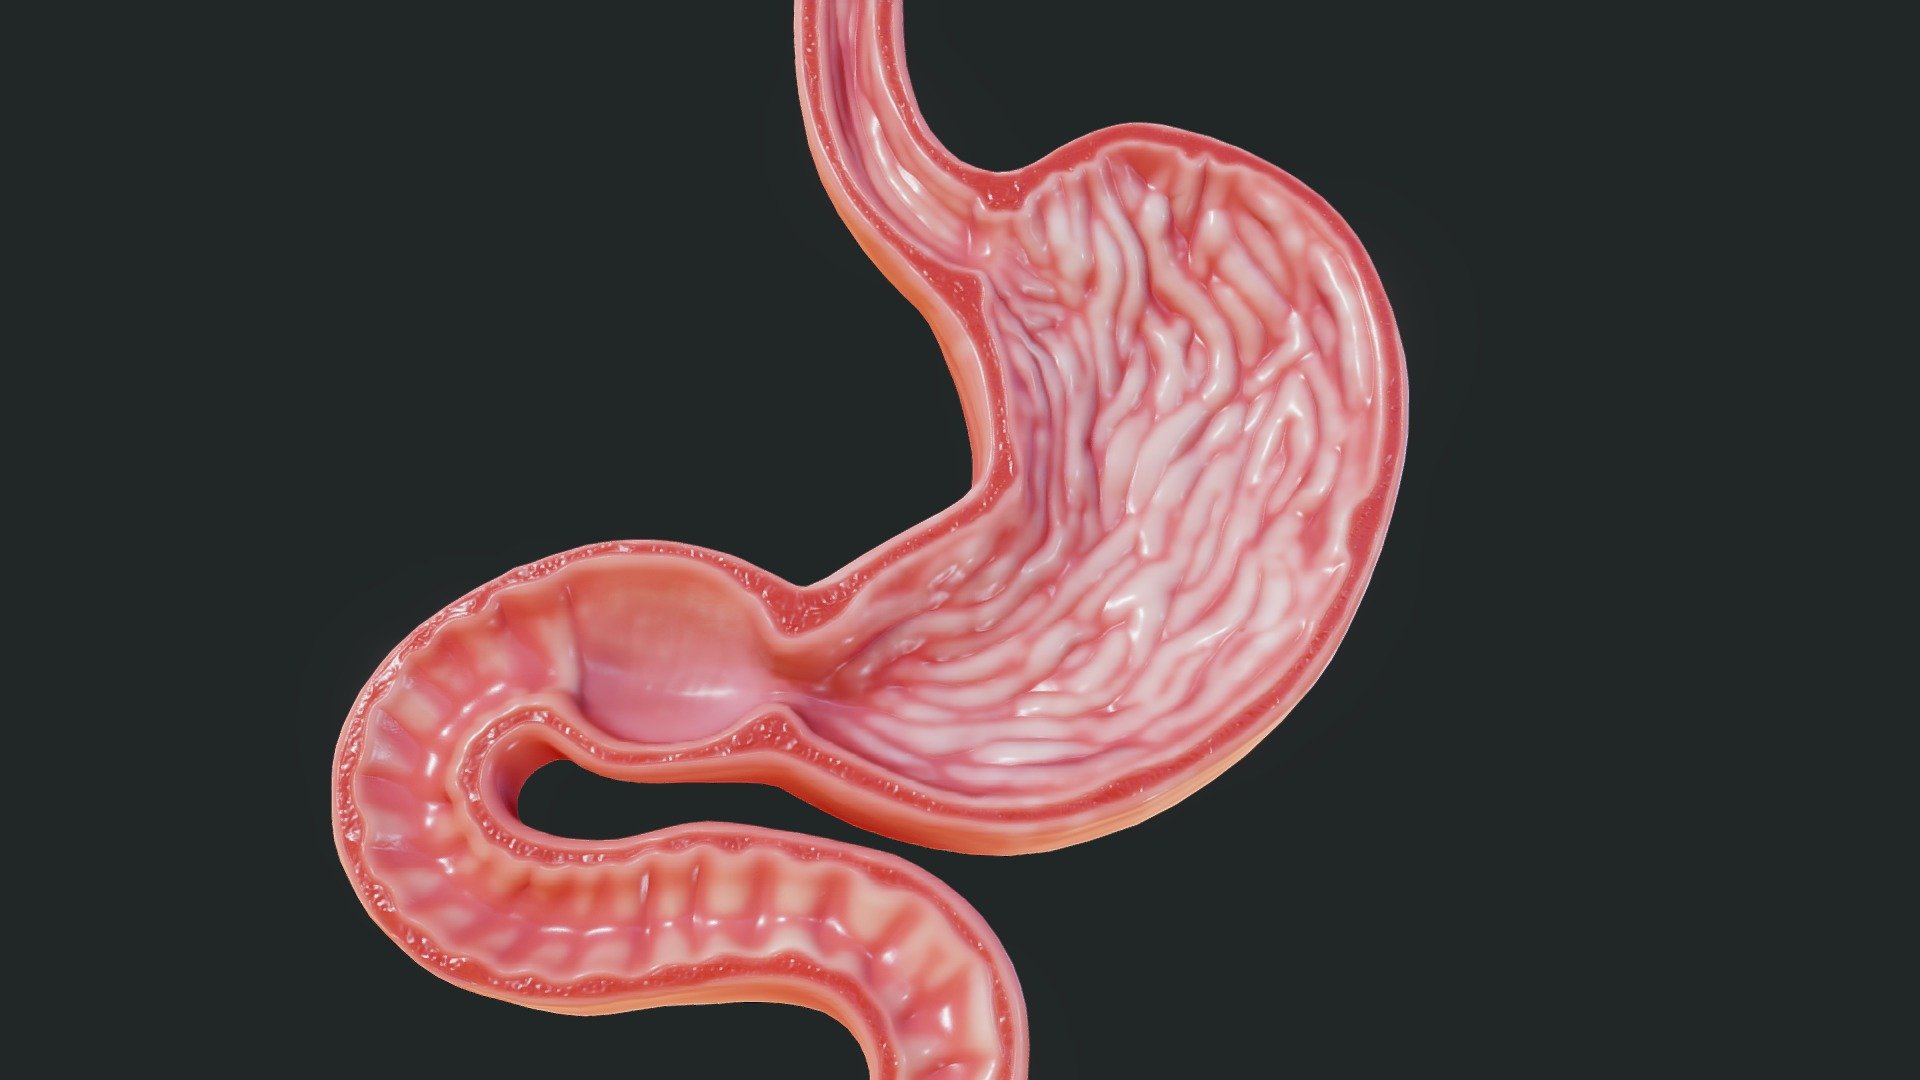 Maps for Human Stomach


BaseColor
Metallic
Roughness
Normal
Ambient Occlusion

SCALE:
- Model at world center and real scale:
       Metric in centimeter
       1 unit = 1 centimeter

Texture resolution:2048x2048

Texture format PNG

Poly Count :
Polygon Count - 7612
Vertex Count - 3808
No N-Gons - Human Stomach - 3D model by zames1992 3d model